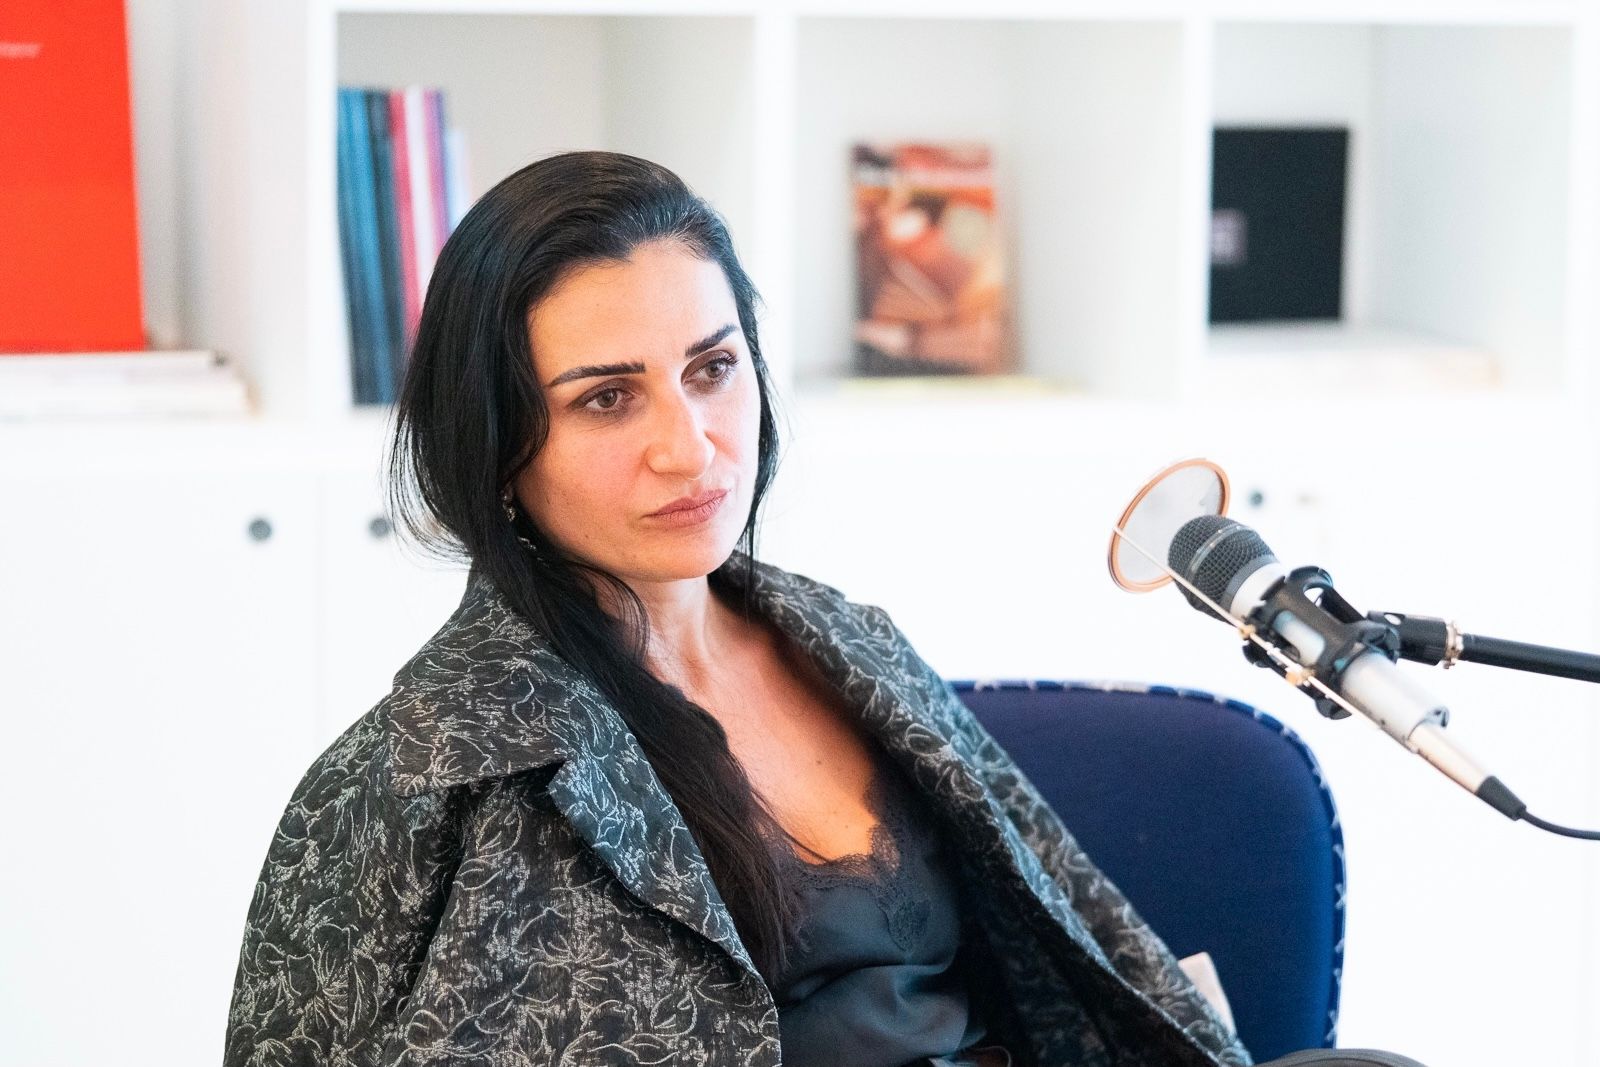 You can’t be noticed unless there is sincerity in your work.” Fashion designer Yasmine Yeya on being inspired by Egypt’s beauty, landing Jennifer Lopez as a customer, and debunking the overnight success myth